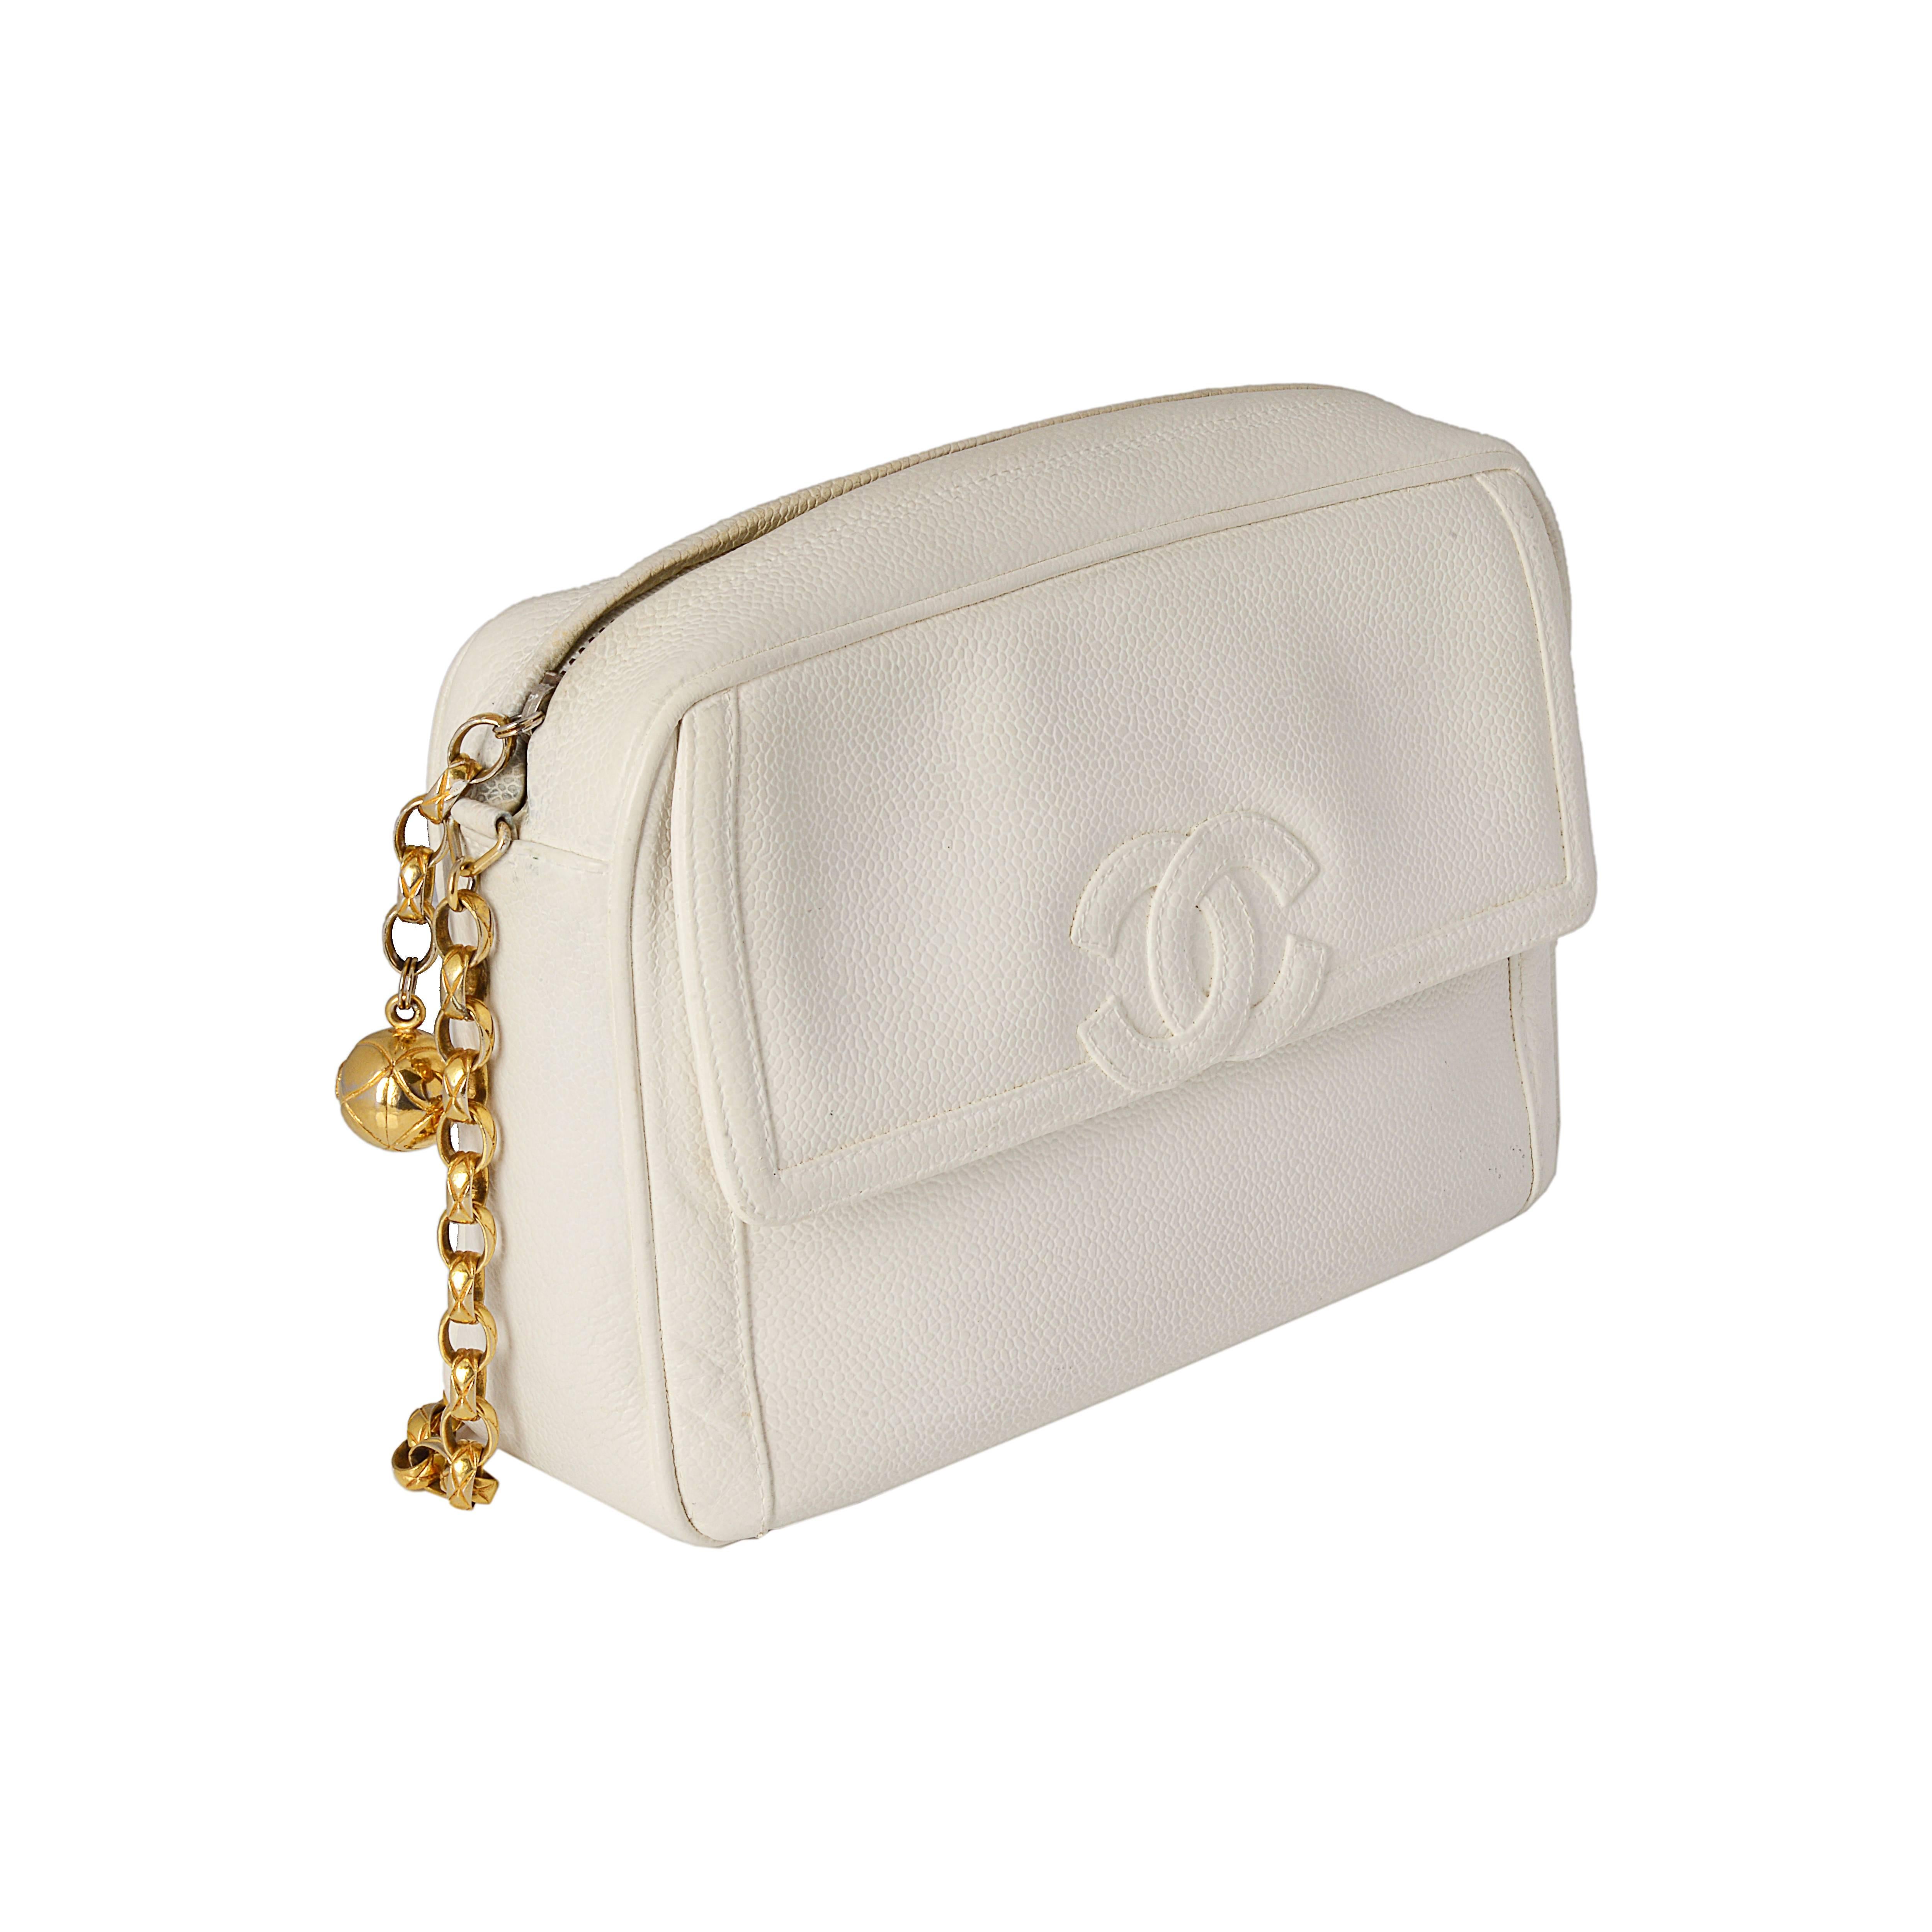 This elegant Chanel bag featuring gold-tone hardware is the perfect everyday bag. The interior compartment fits all your daily essentials. The exterior features an interlocking 'CC' logo and front flap compartment. The striking gold chain strap adds